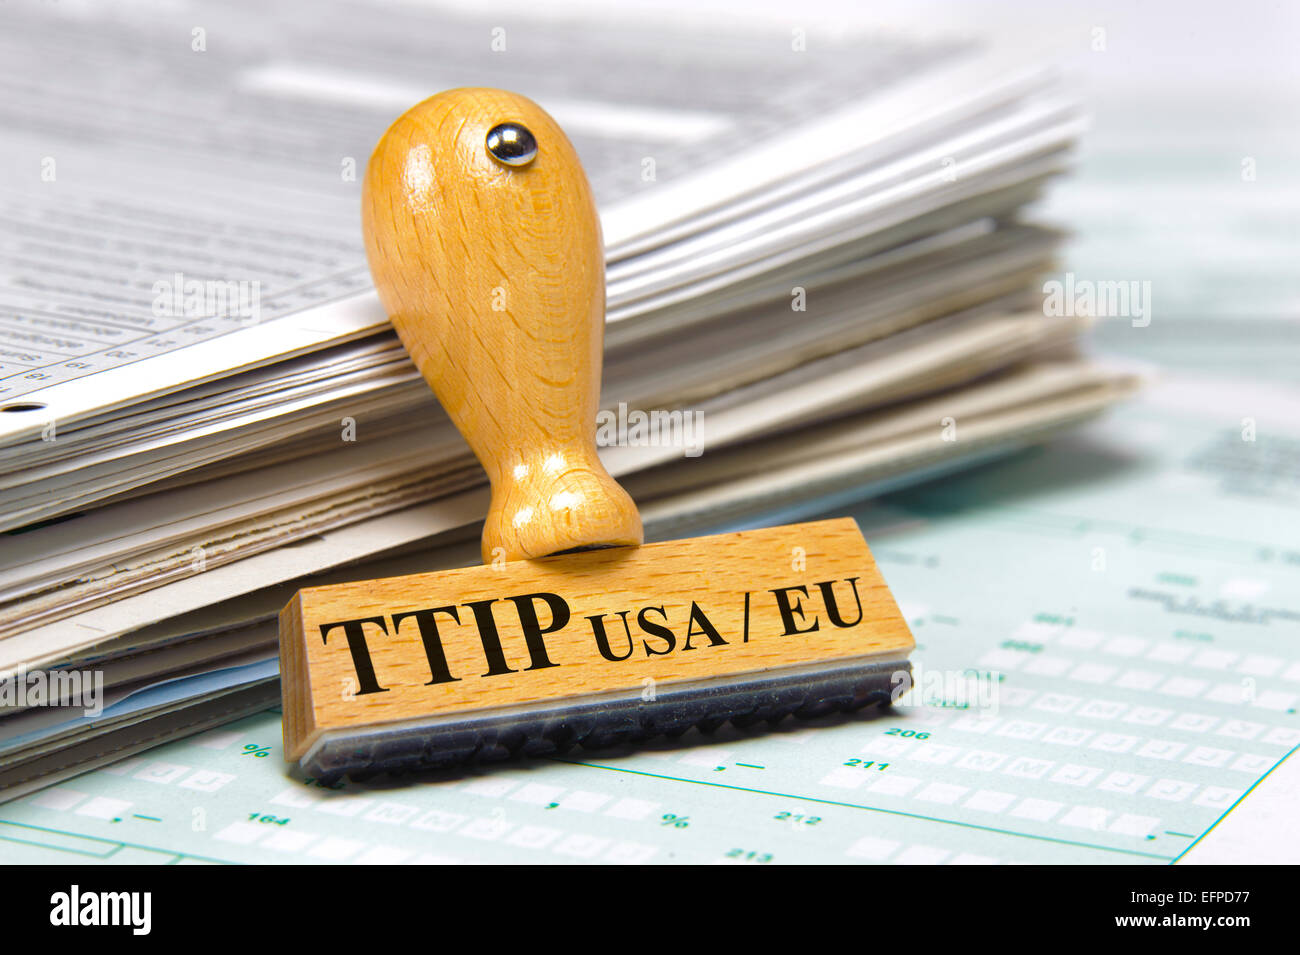 TTIP free trade agreement between USA and Europe Stock Photo